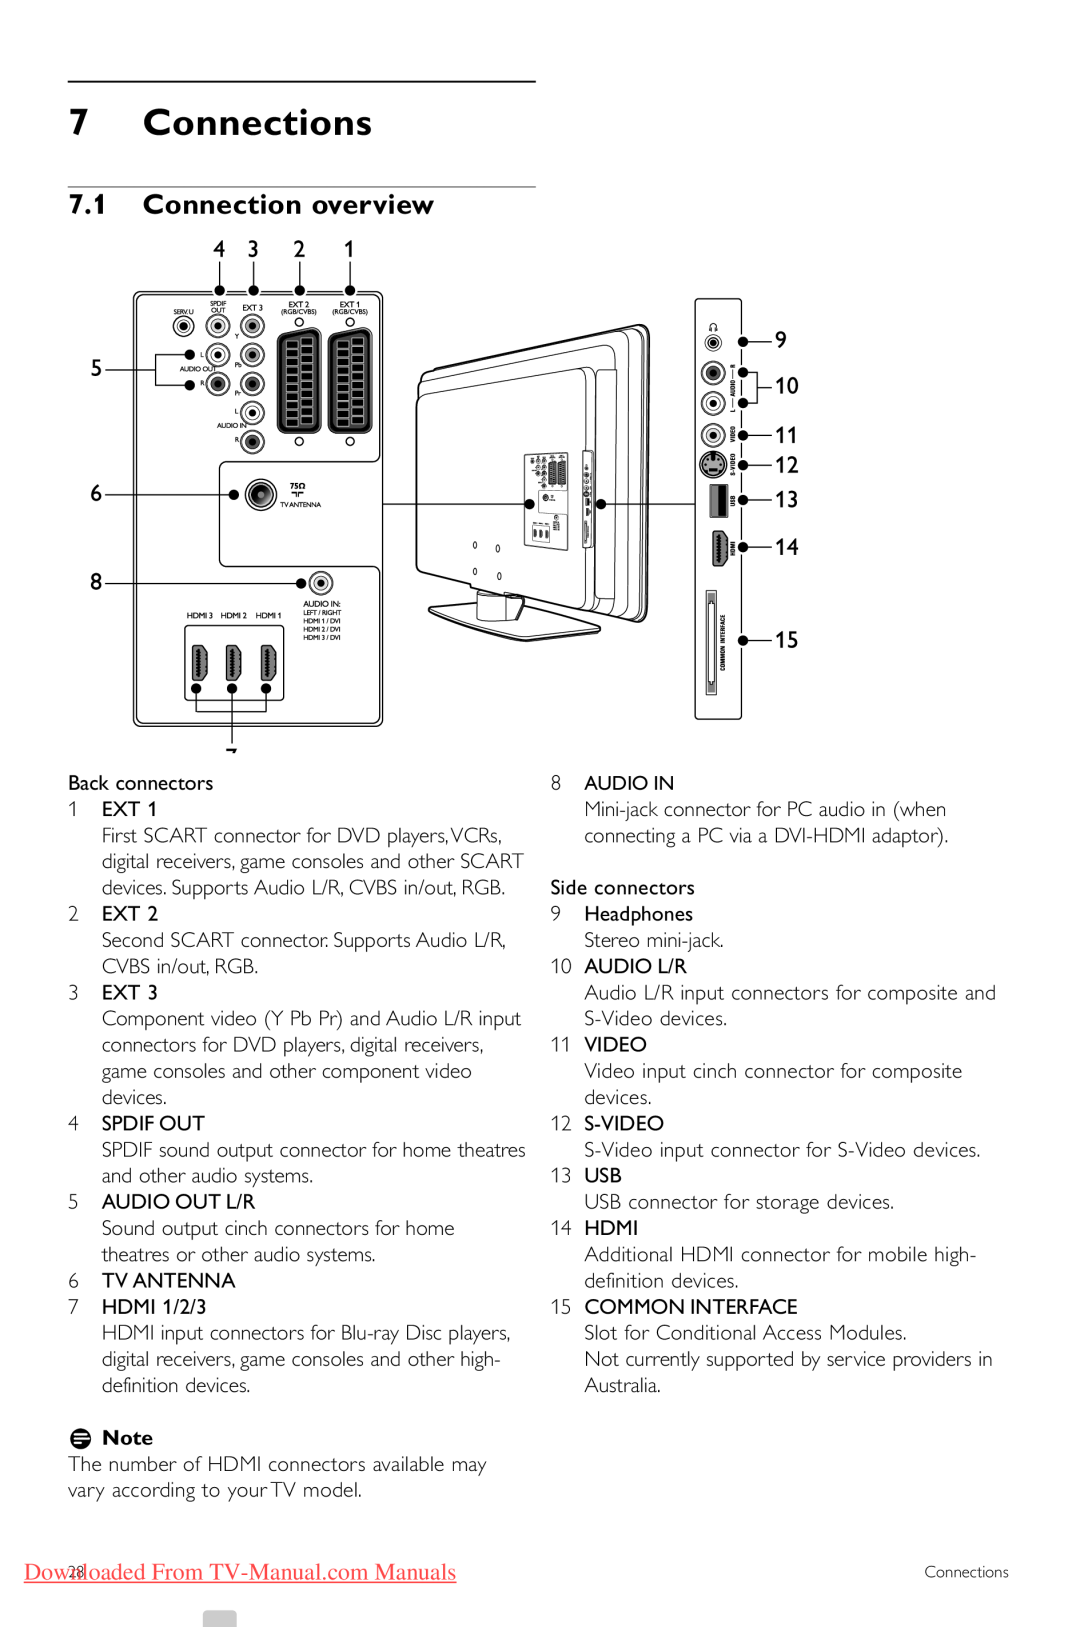 Philips 42PFL5603, 42PFL5403, 47PFL5603 Connections, 7.1Connection overview, Downloaded From TV-Manual.comManuals, rNote 